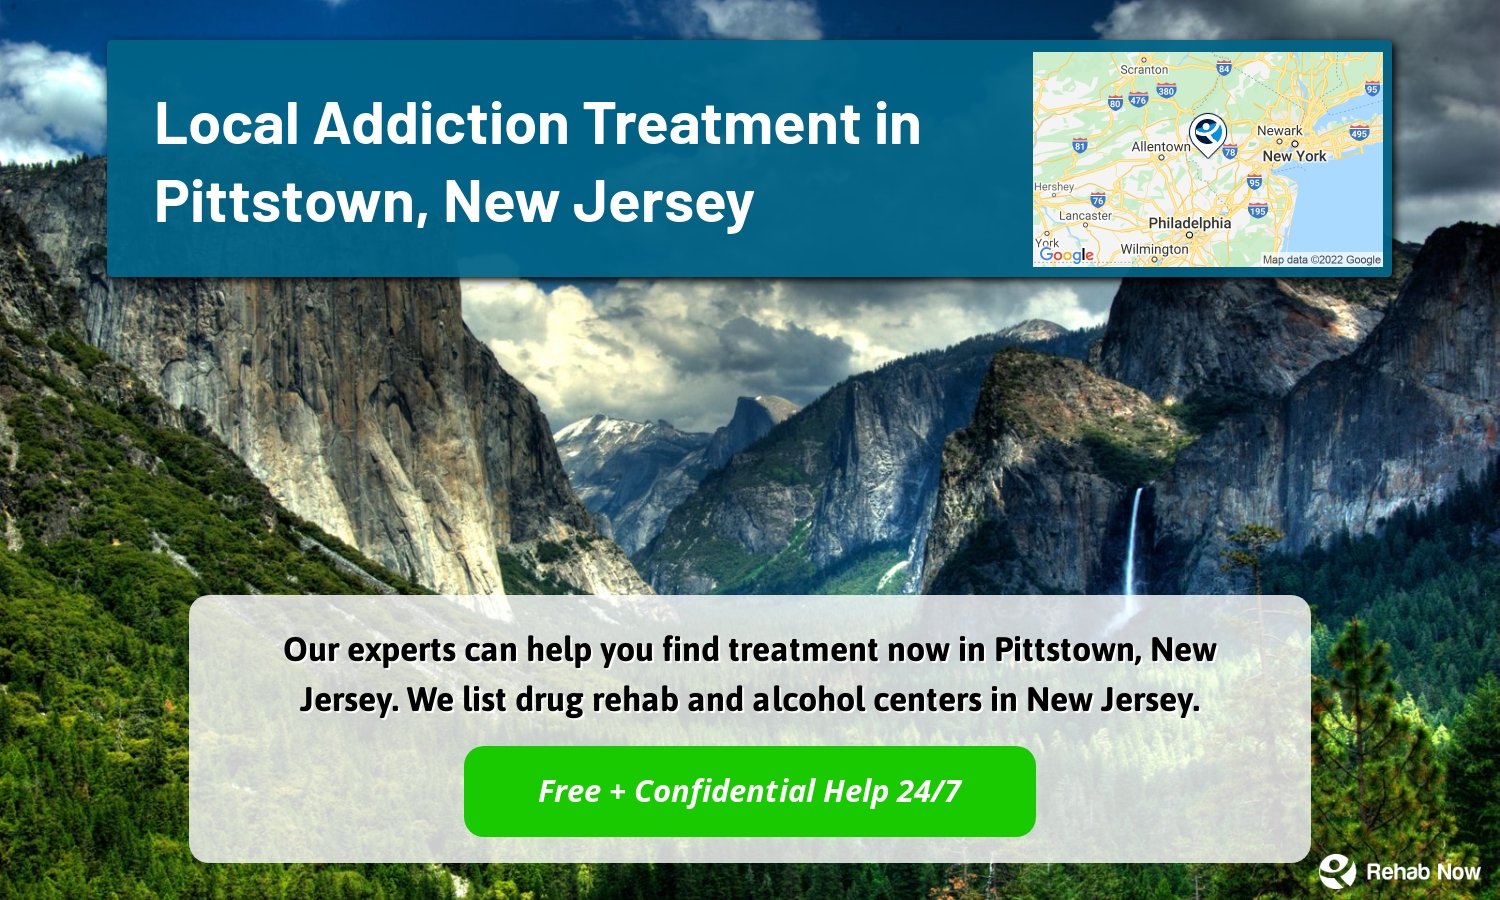 Our experts can help you find treatment now in Pittstown, New Jersey. We list drug rehab and alcohol centers in New Jersey.